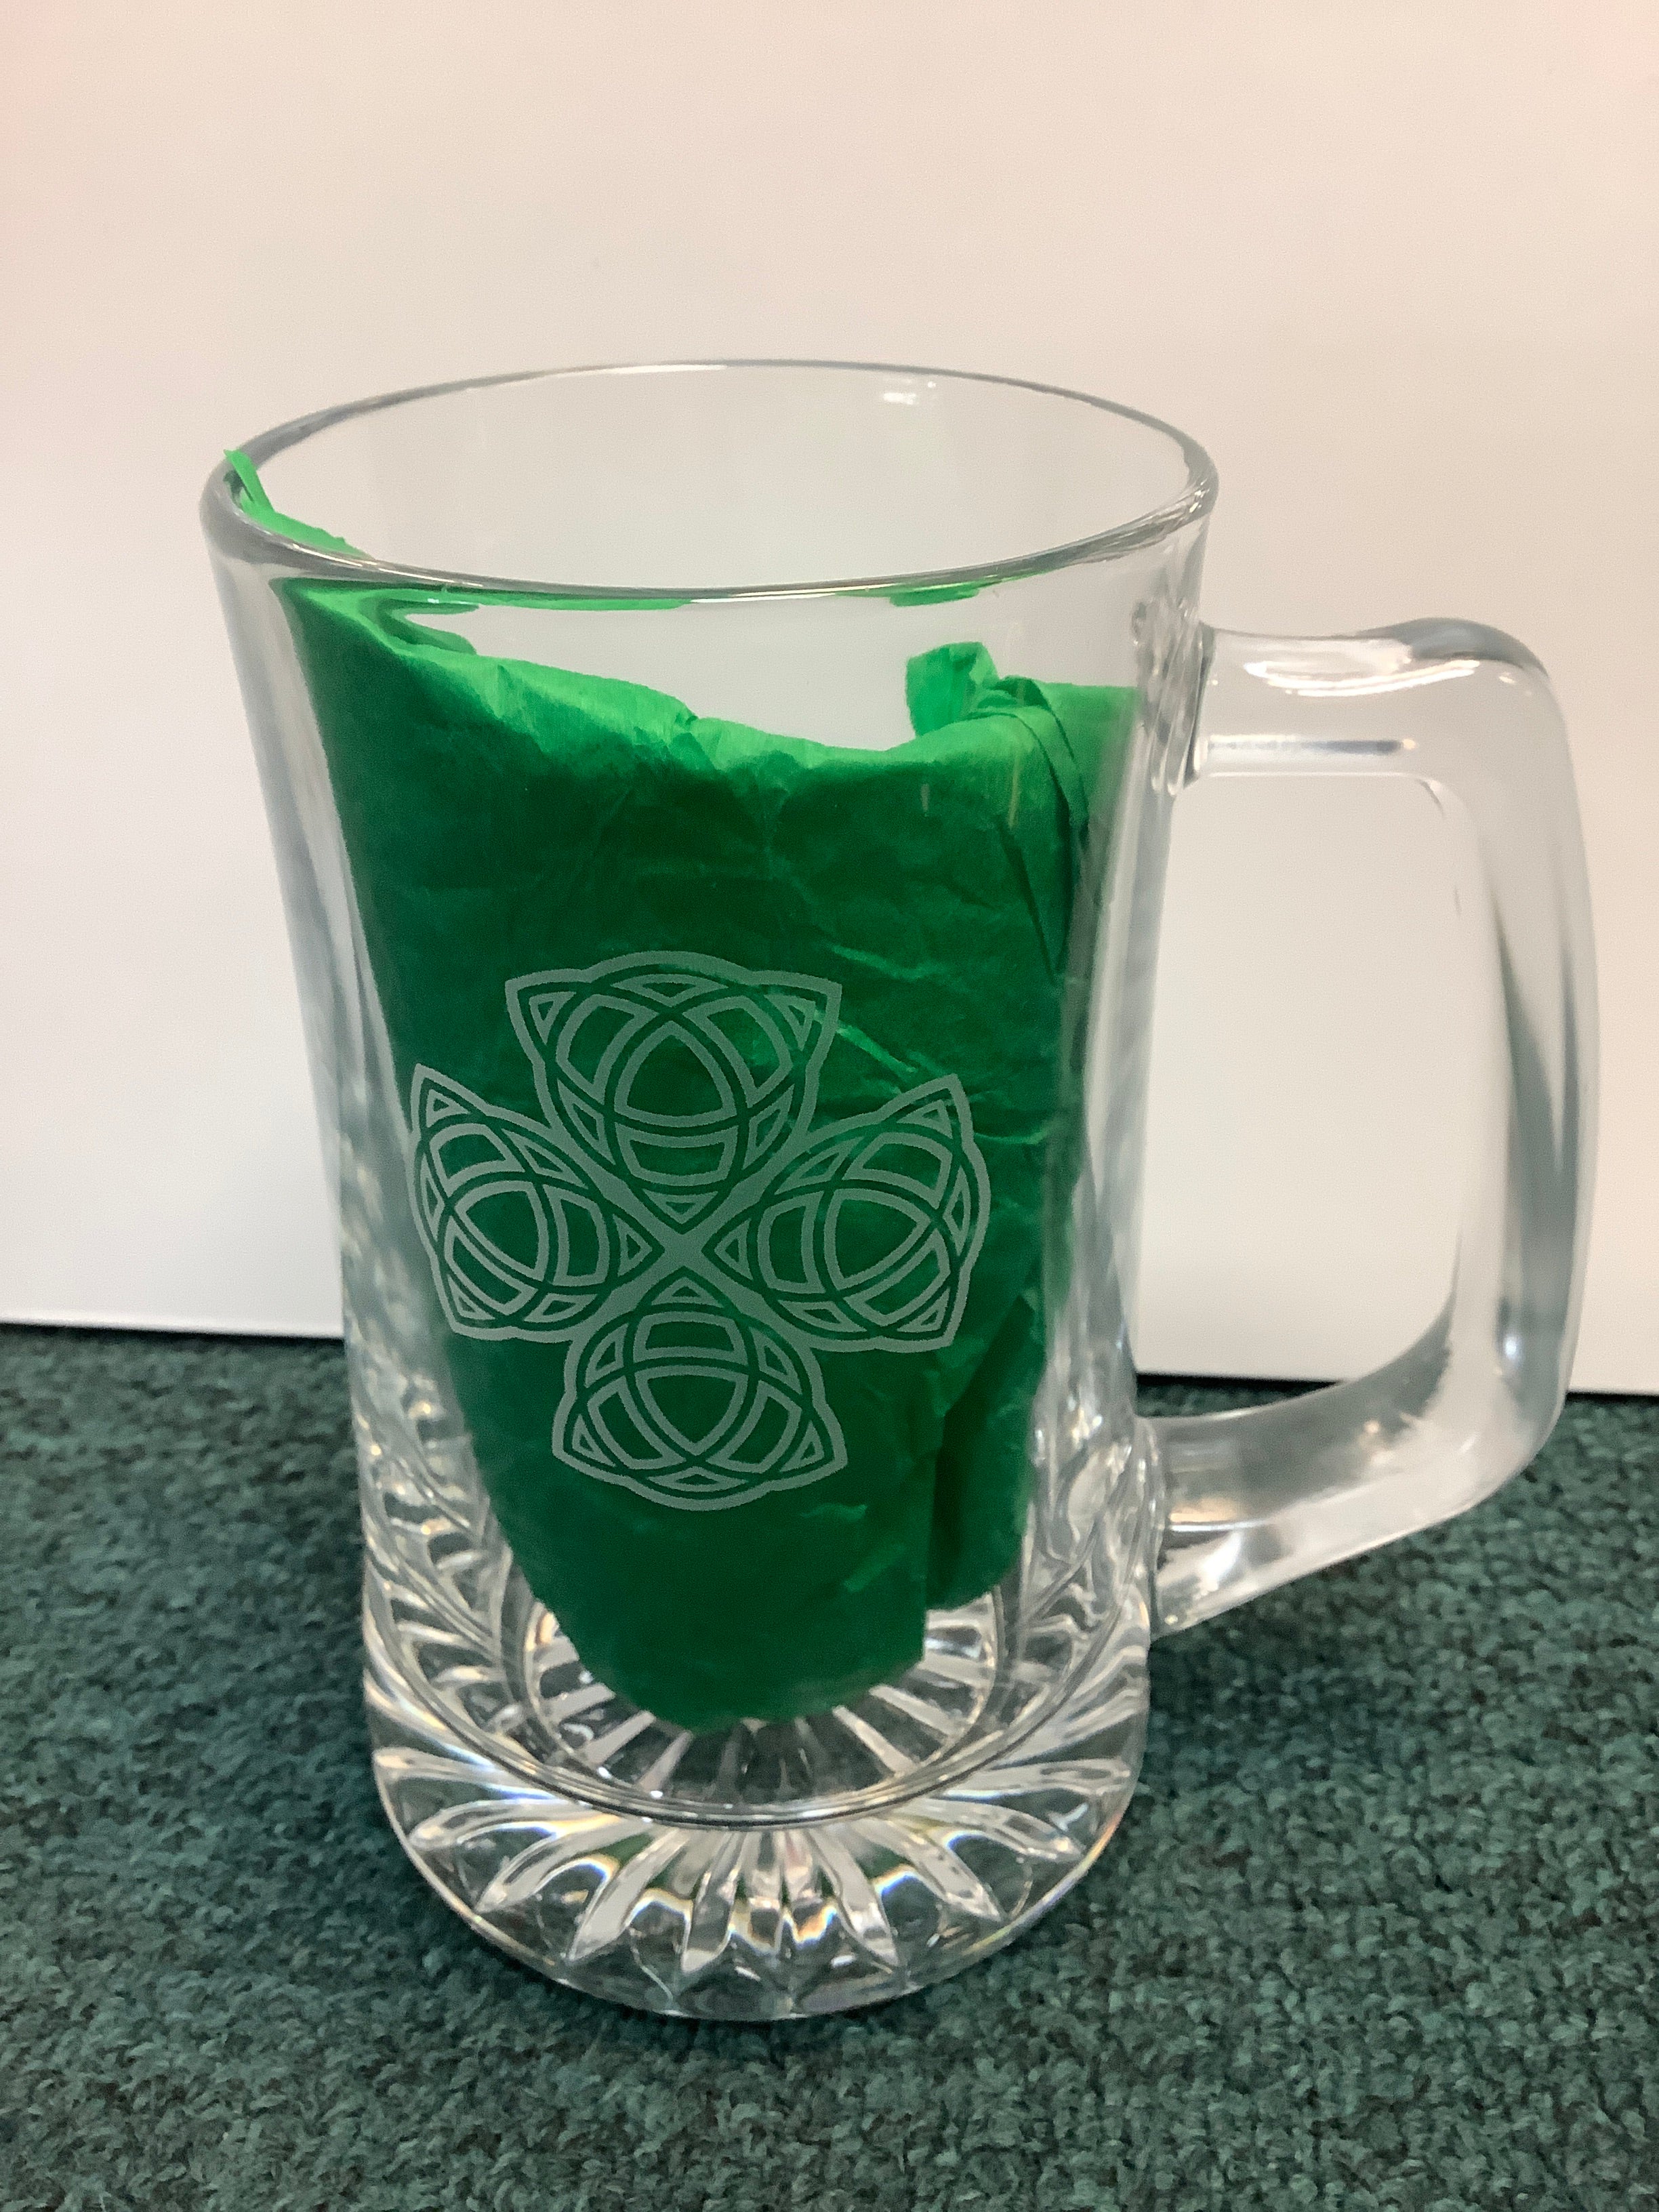 Heavy Celtic knot beer stein